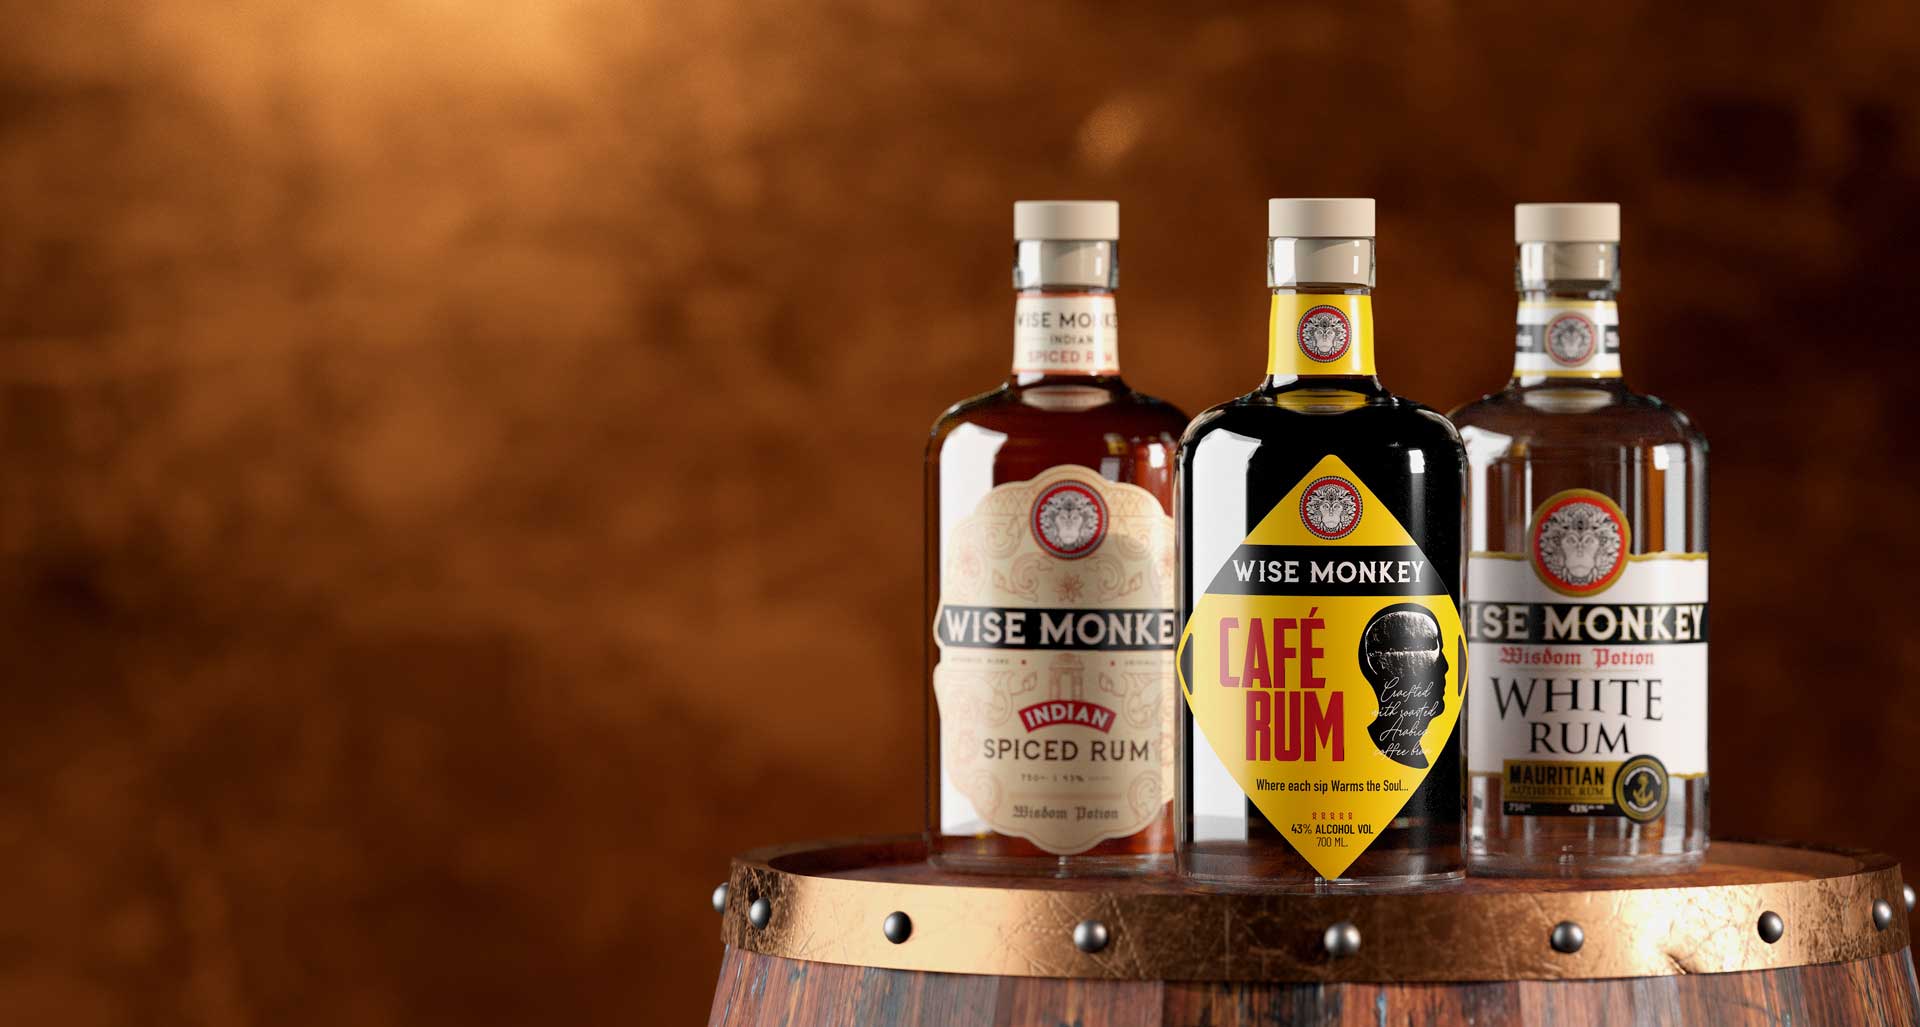 Nirvana Works International launches Wise Monkey Indian Spiced Rum